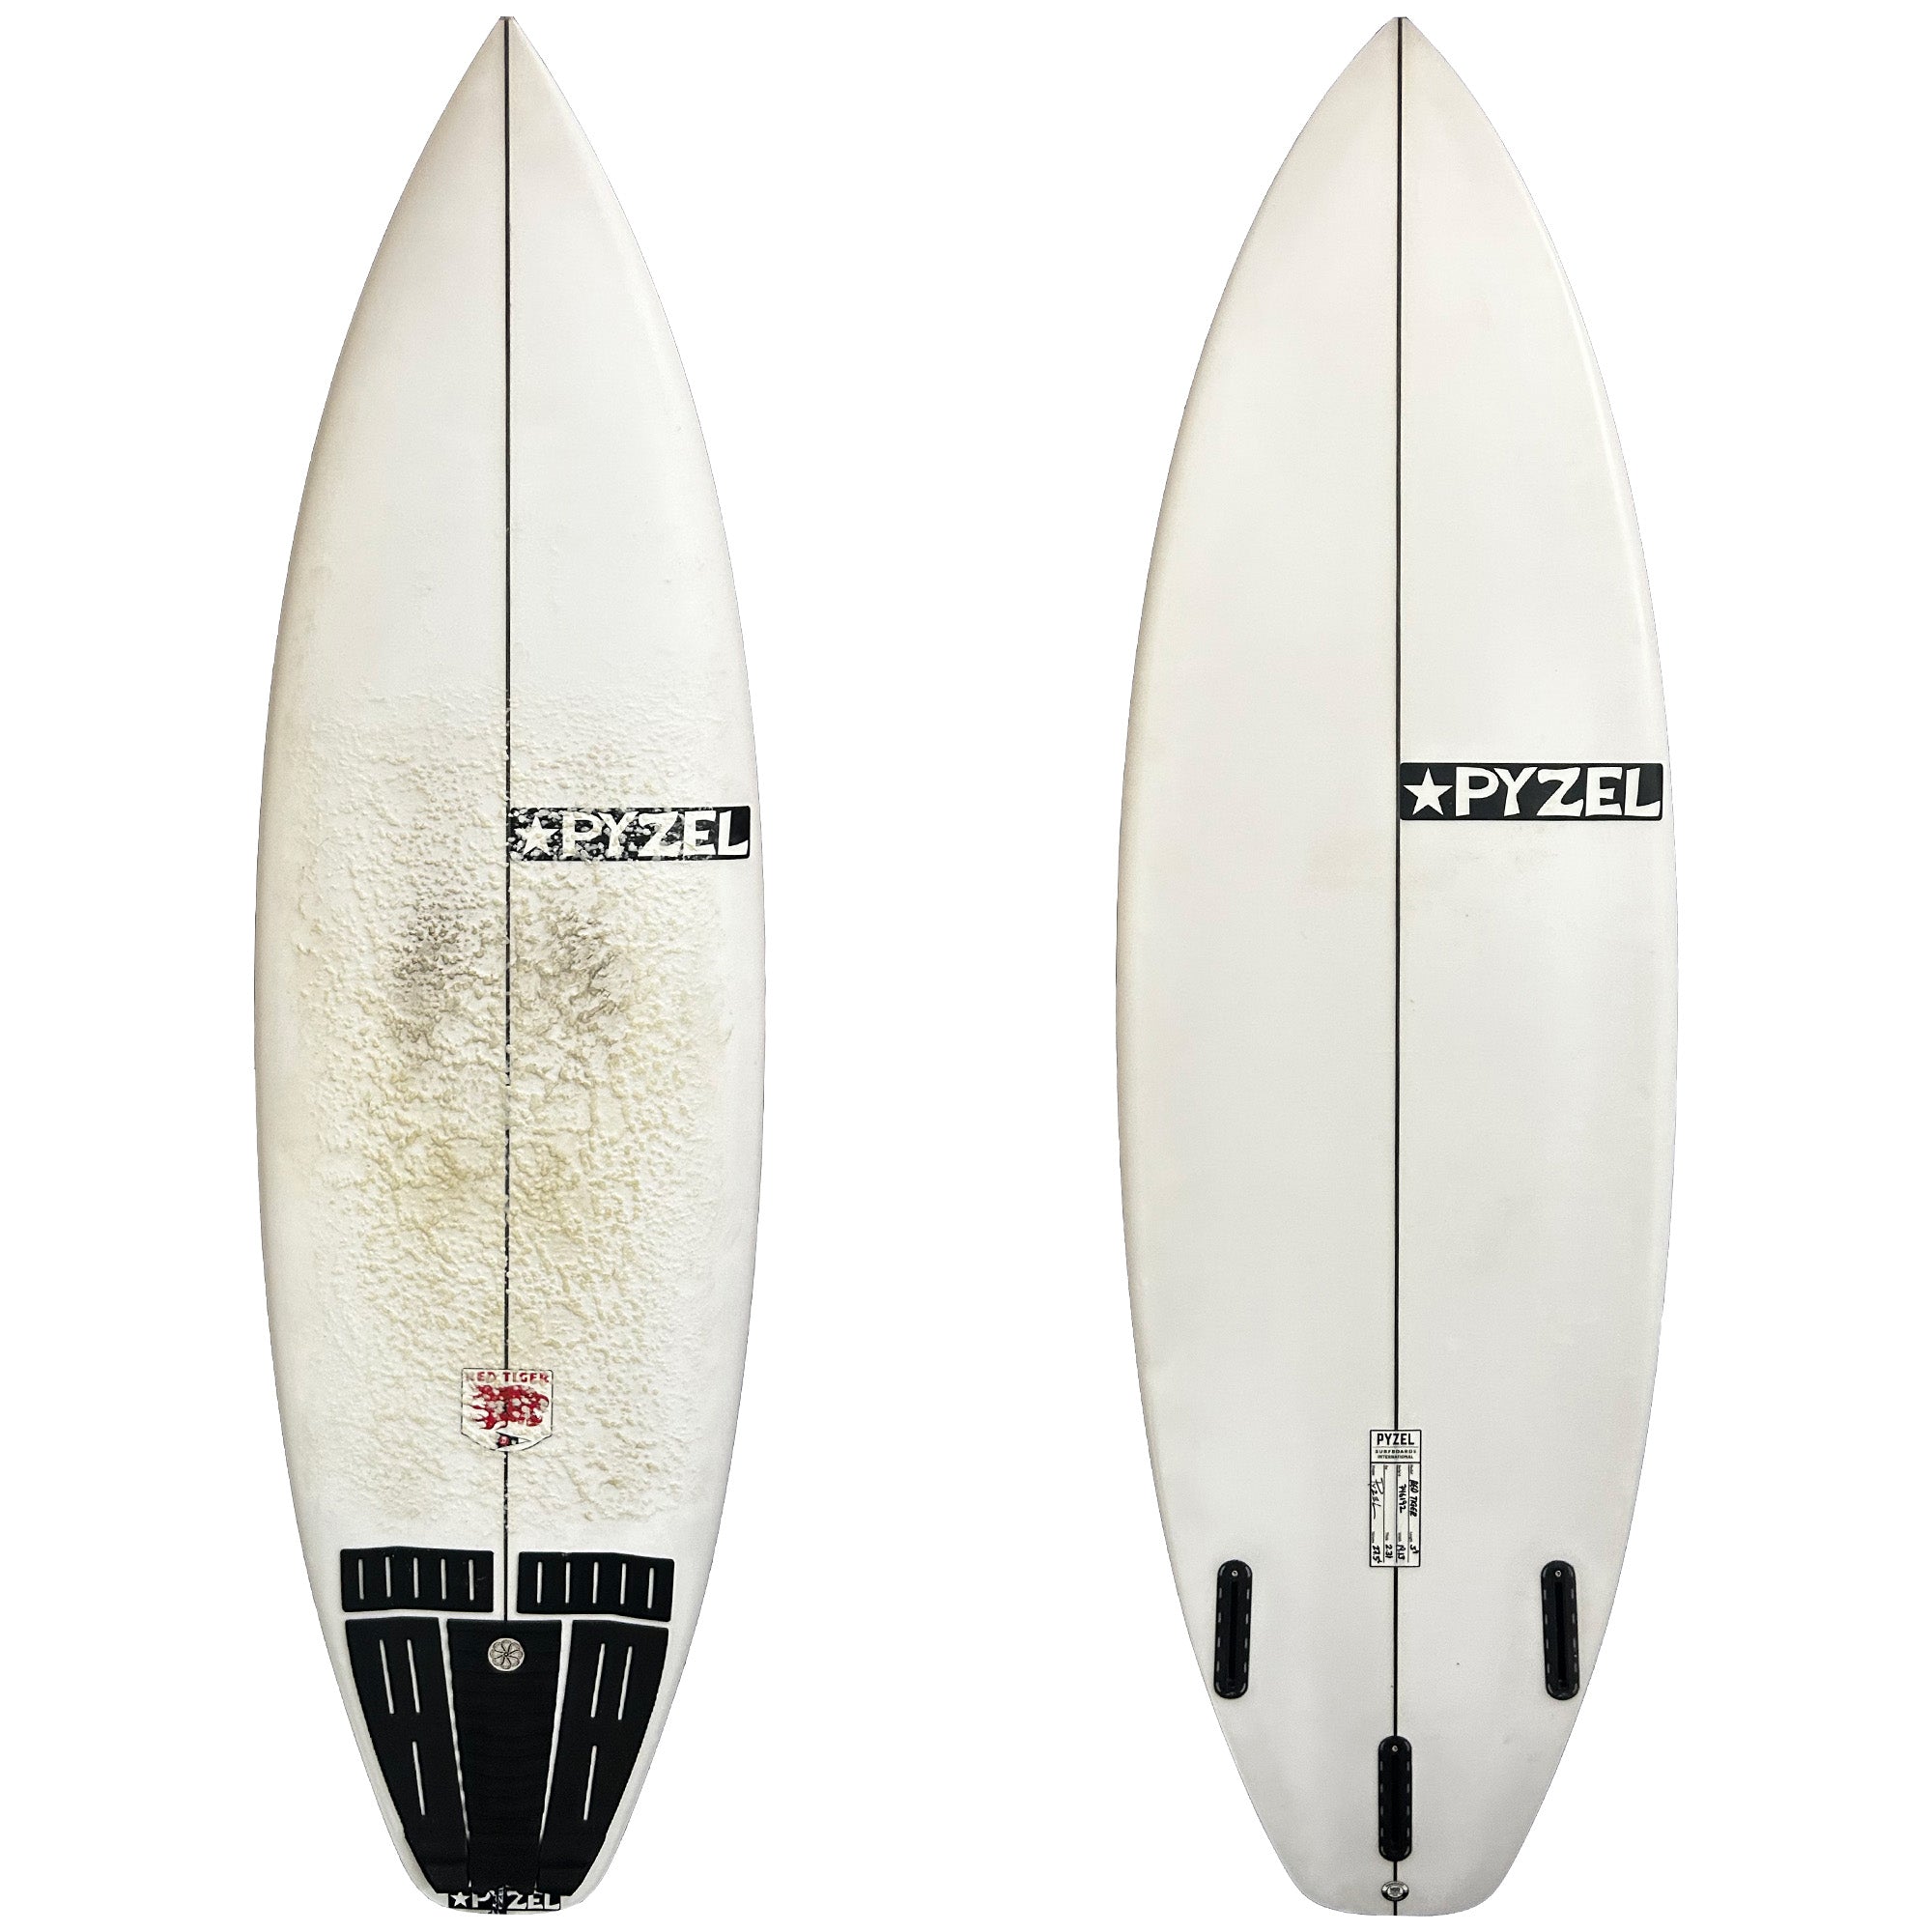 Pyzel Red Tiger 5'9 Used Surfboard